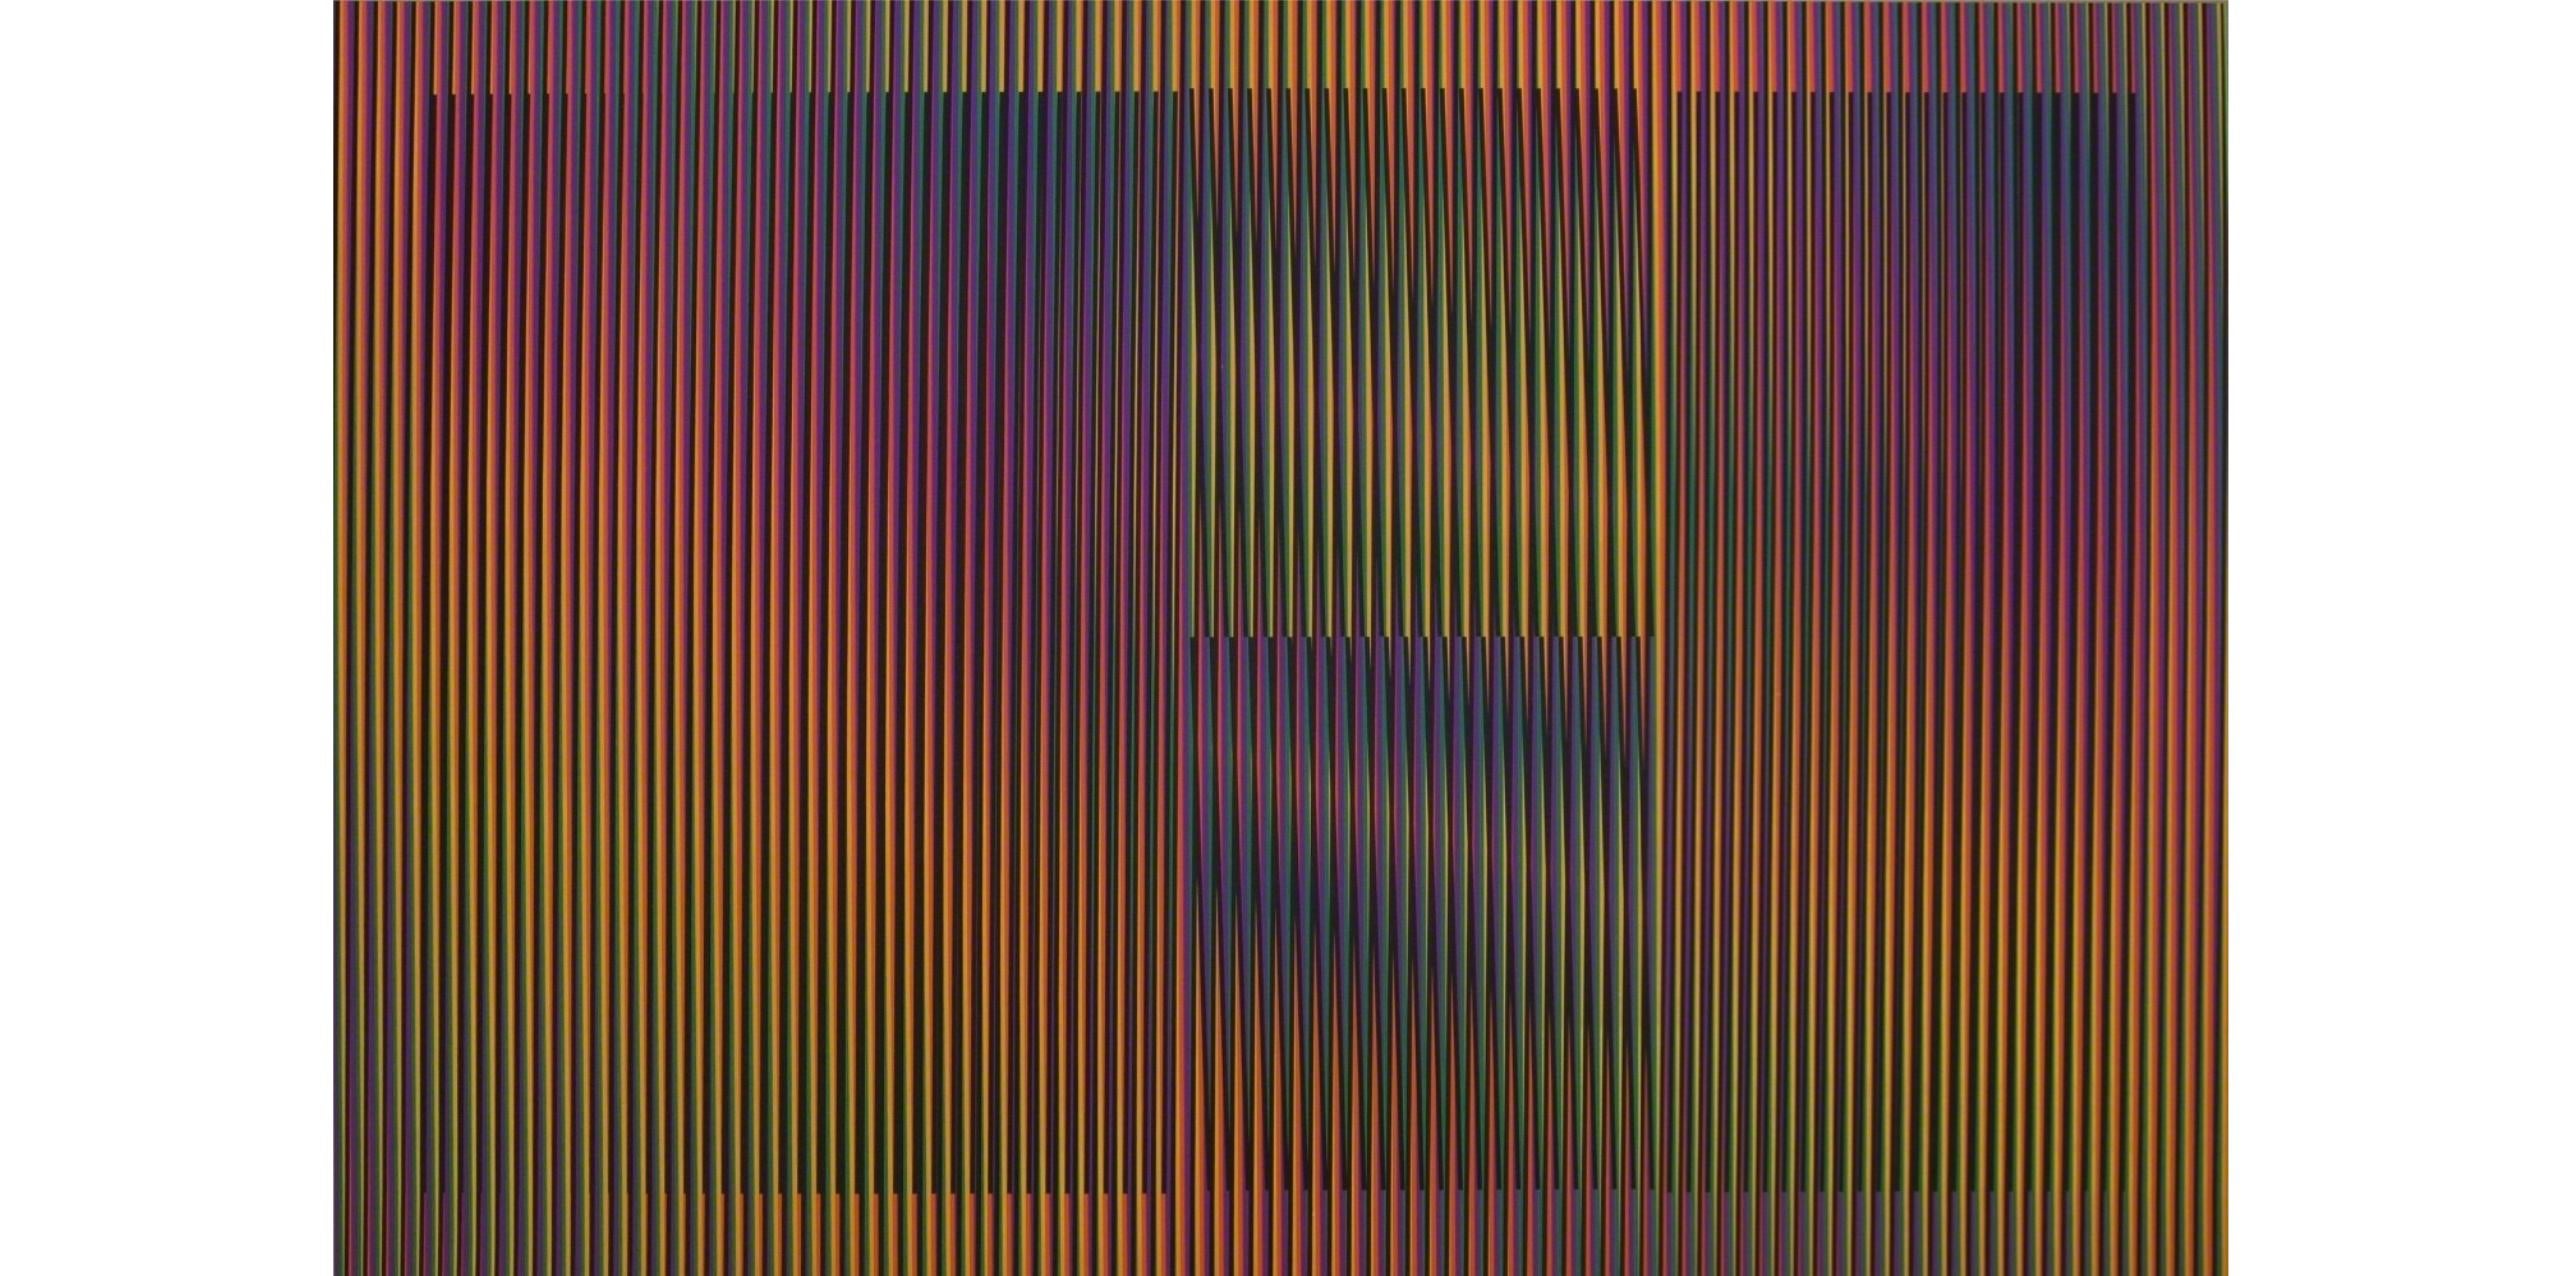 'Color Aditivo Cantarrana 2' color lithograph. 

Made by Carlos Cruz-Diez from Venezuela, circa 2016.

Limited Edition of 40 hand signed.

About the artist:
Carlos Cruz-Diez’s vivid studies of color, light, pattern, and perception helped